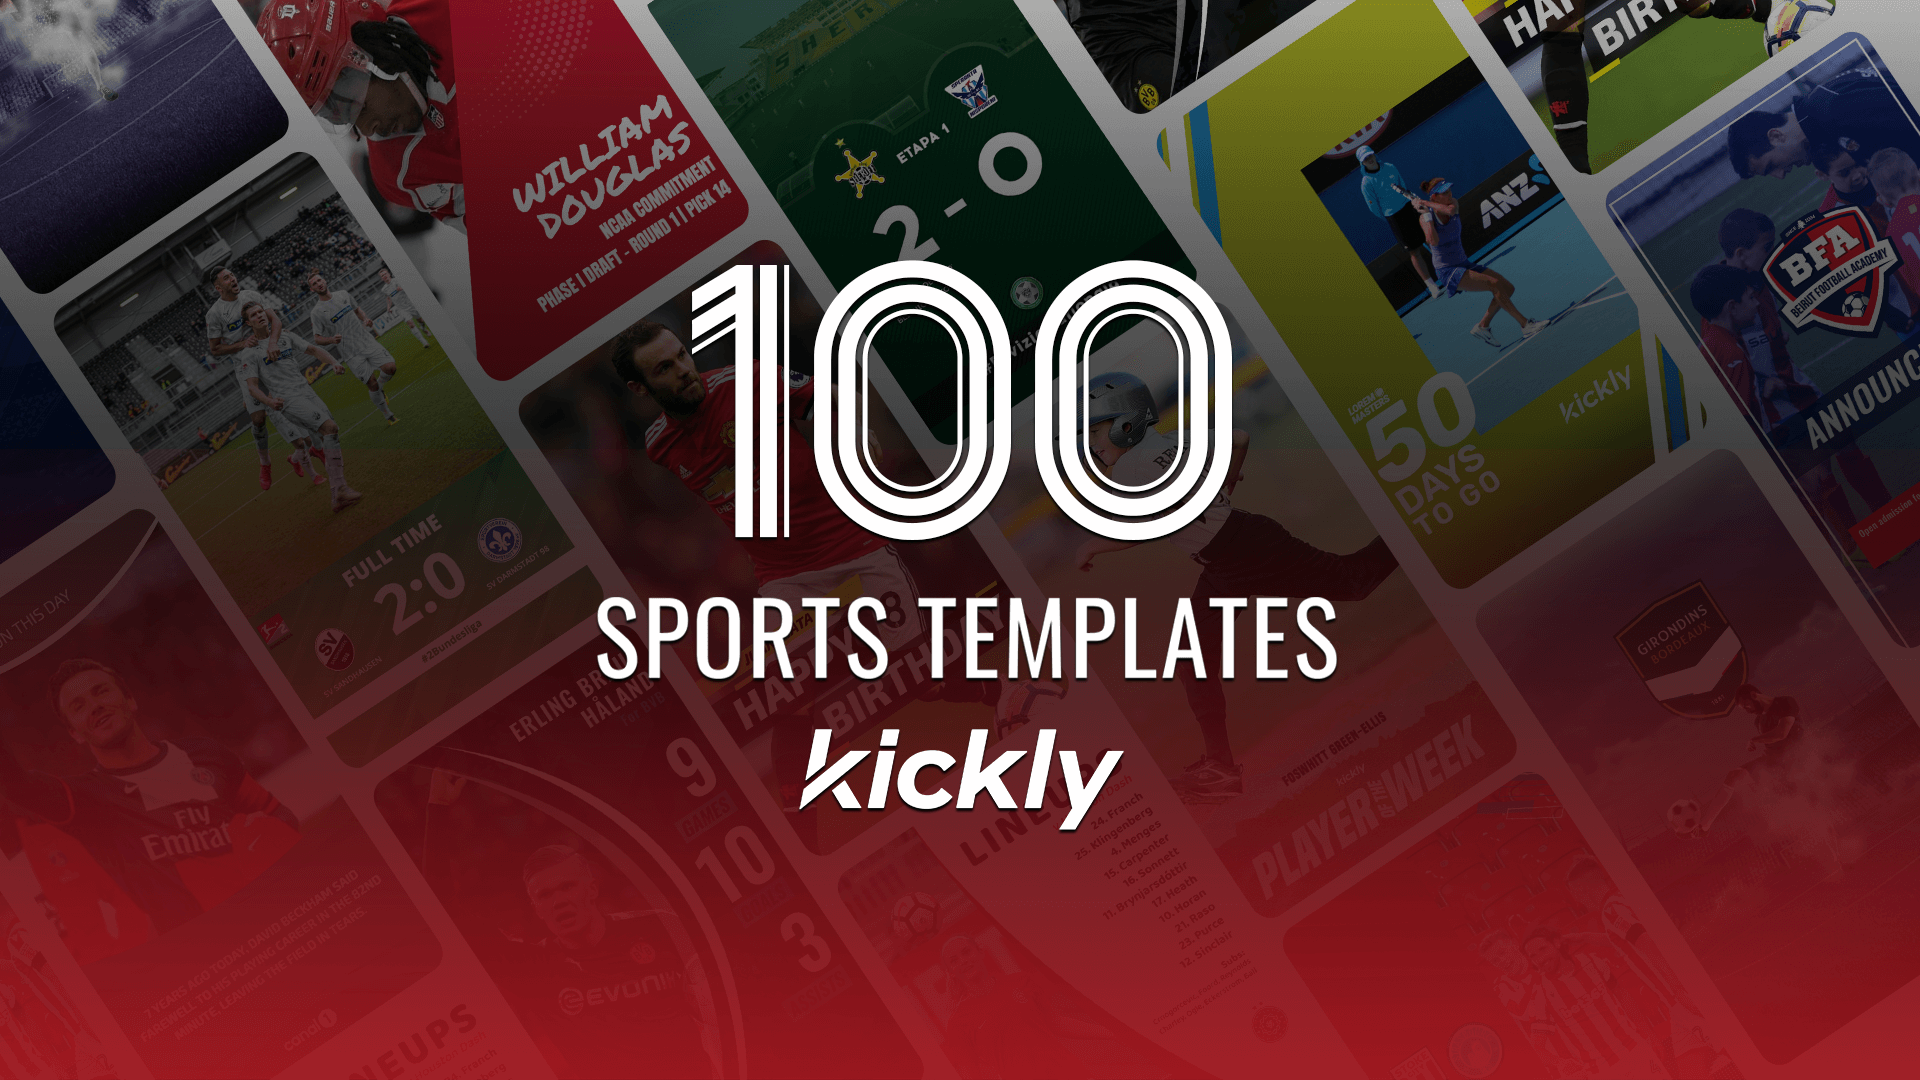 Lessons to Share After Making 100 Sports Templates